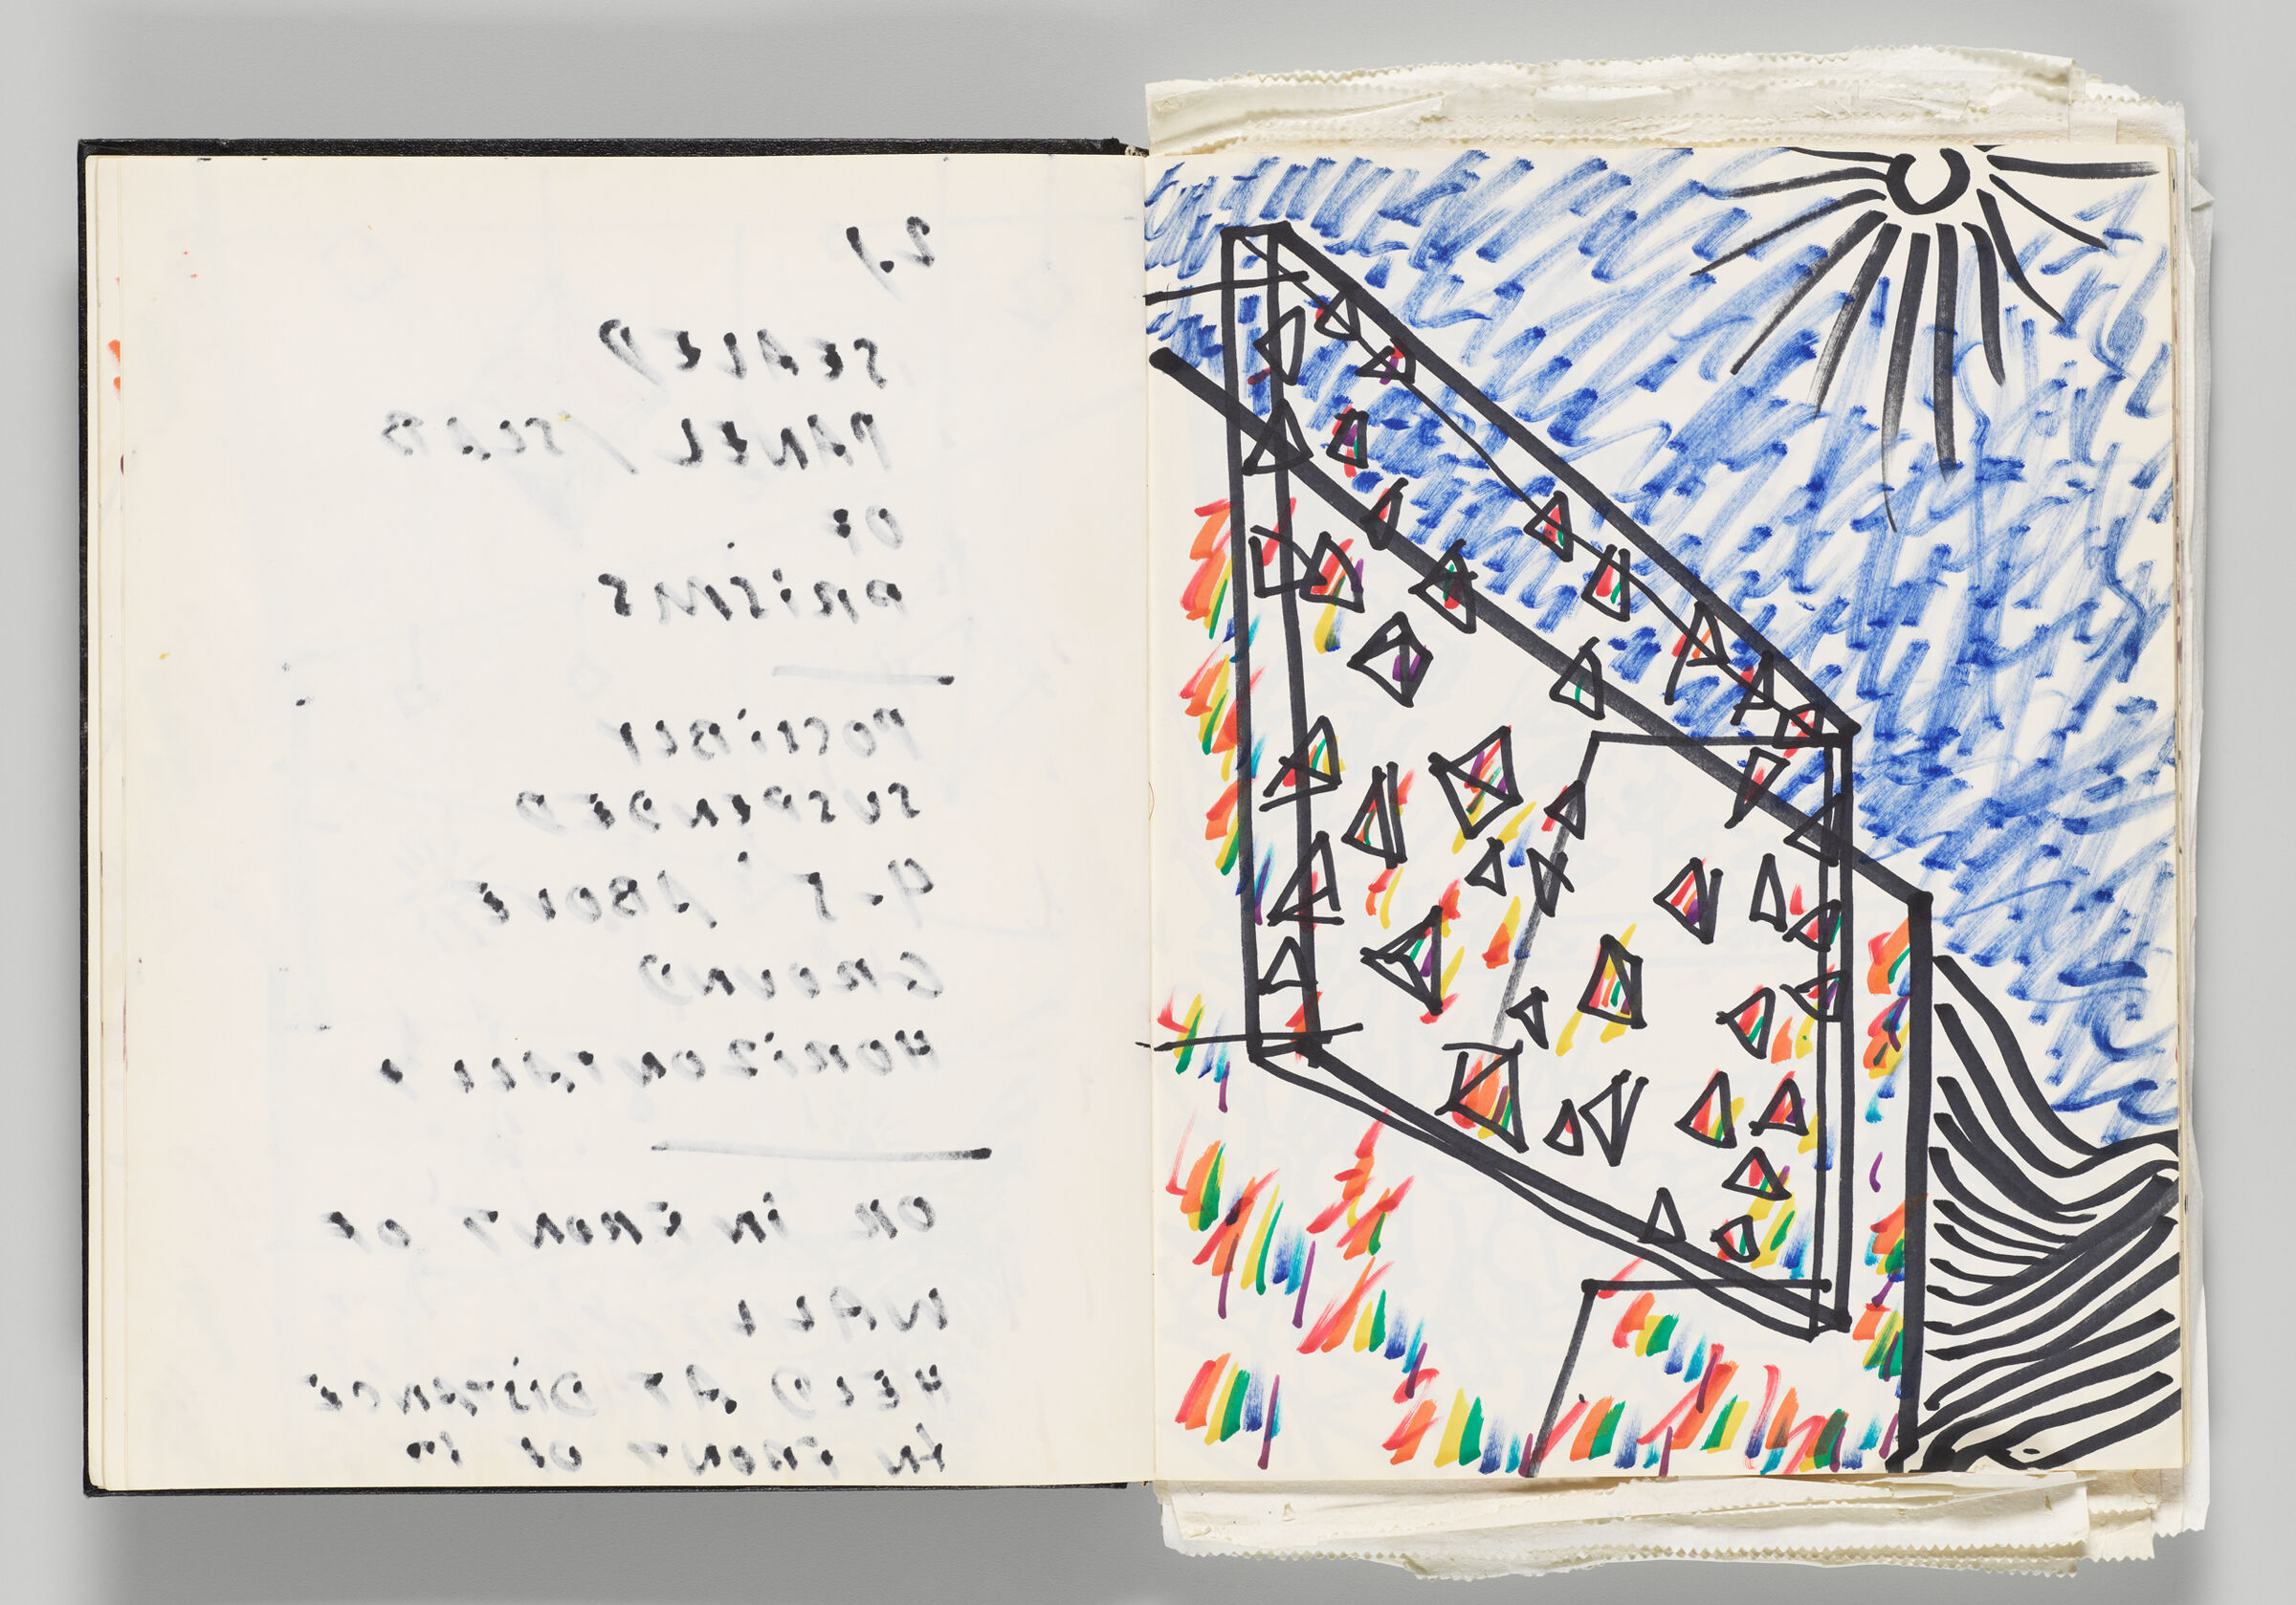 Untitled (Bleed-Through Of Previous Page, Left Page); Untitled (Prisms Extending From Wall, Right Page)